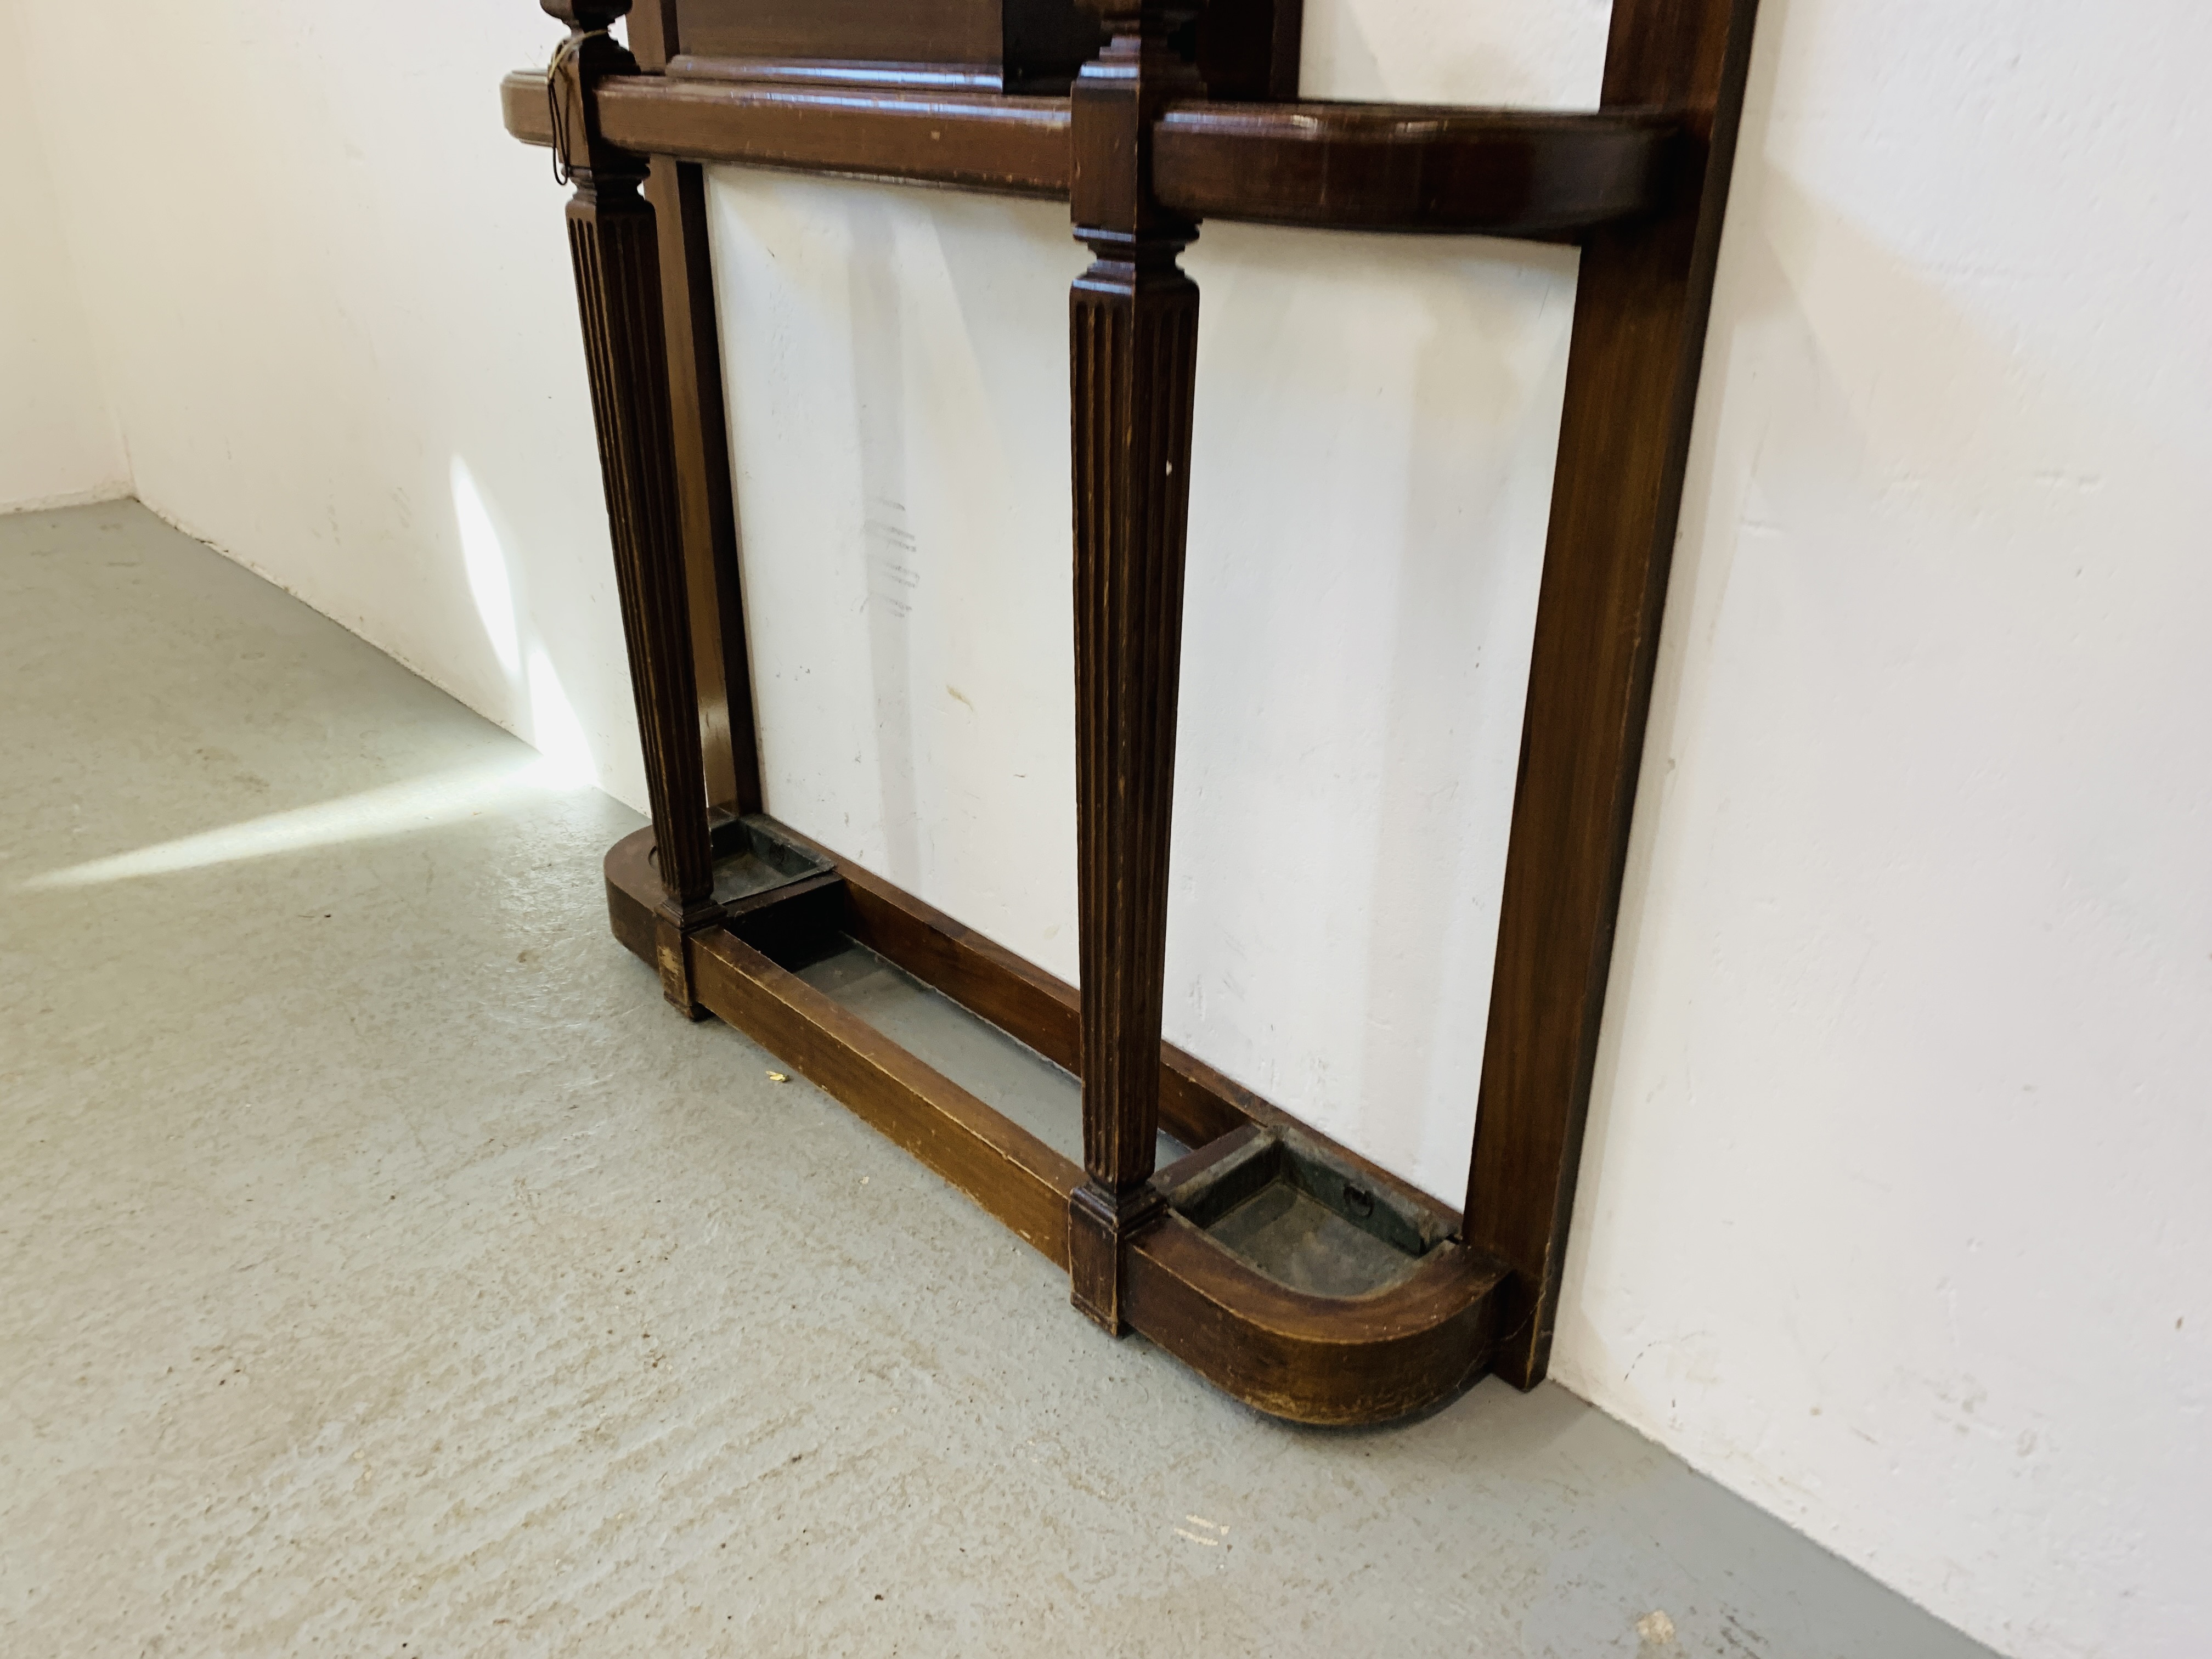 A MAHOGANY HALL STAND WITH CENTRAL MIRROR AND GLOVE BOX. W 99CM. D 19CM. H 195CM. - Image 4 of 10